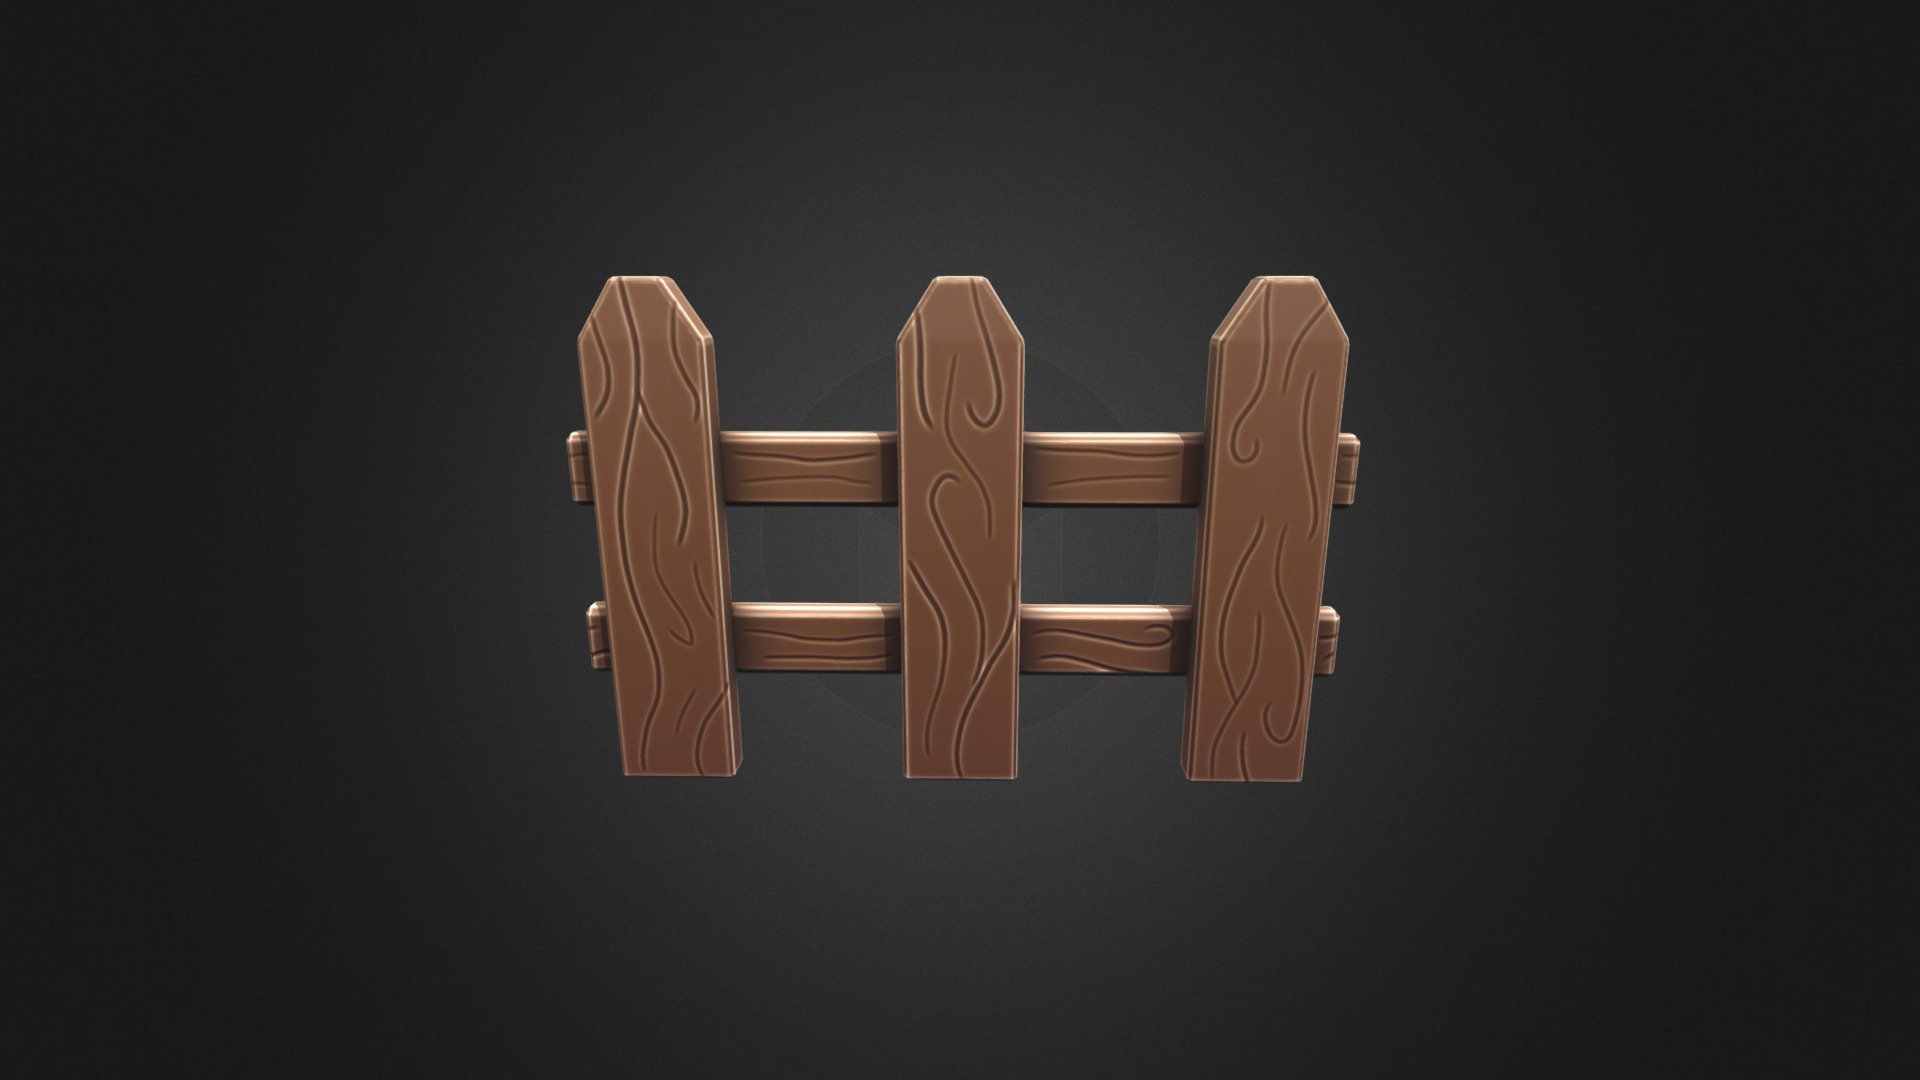 Fence asset used in my last game project - Fence - Download Free 3D model by Cavalqs 3d model